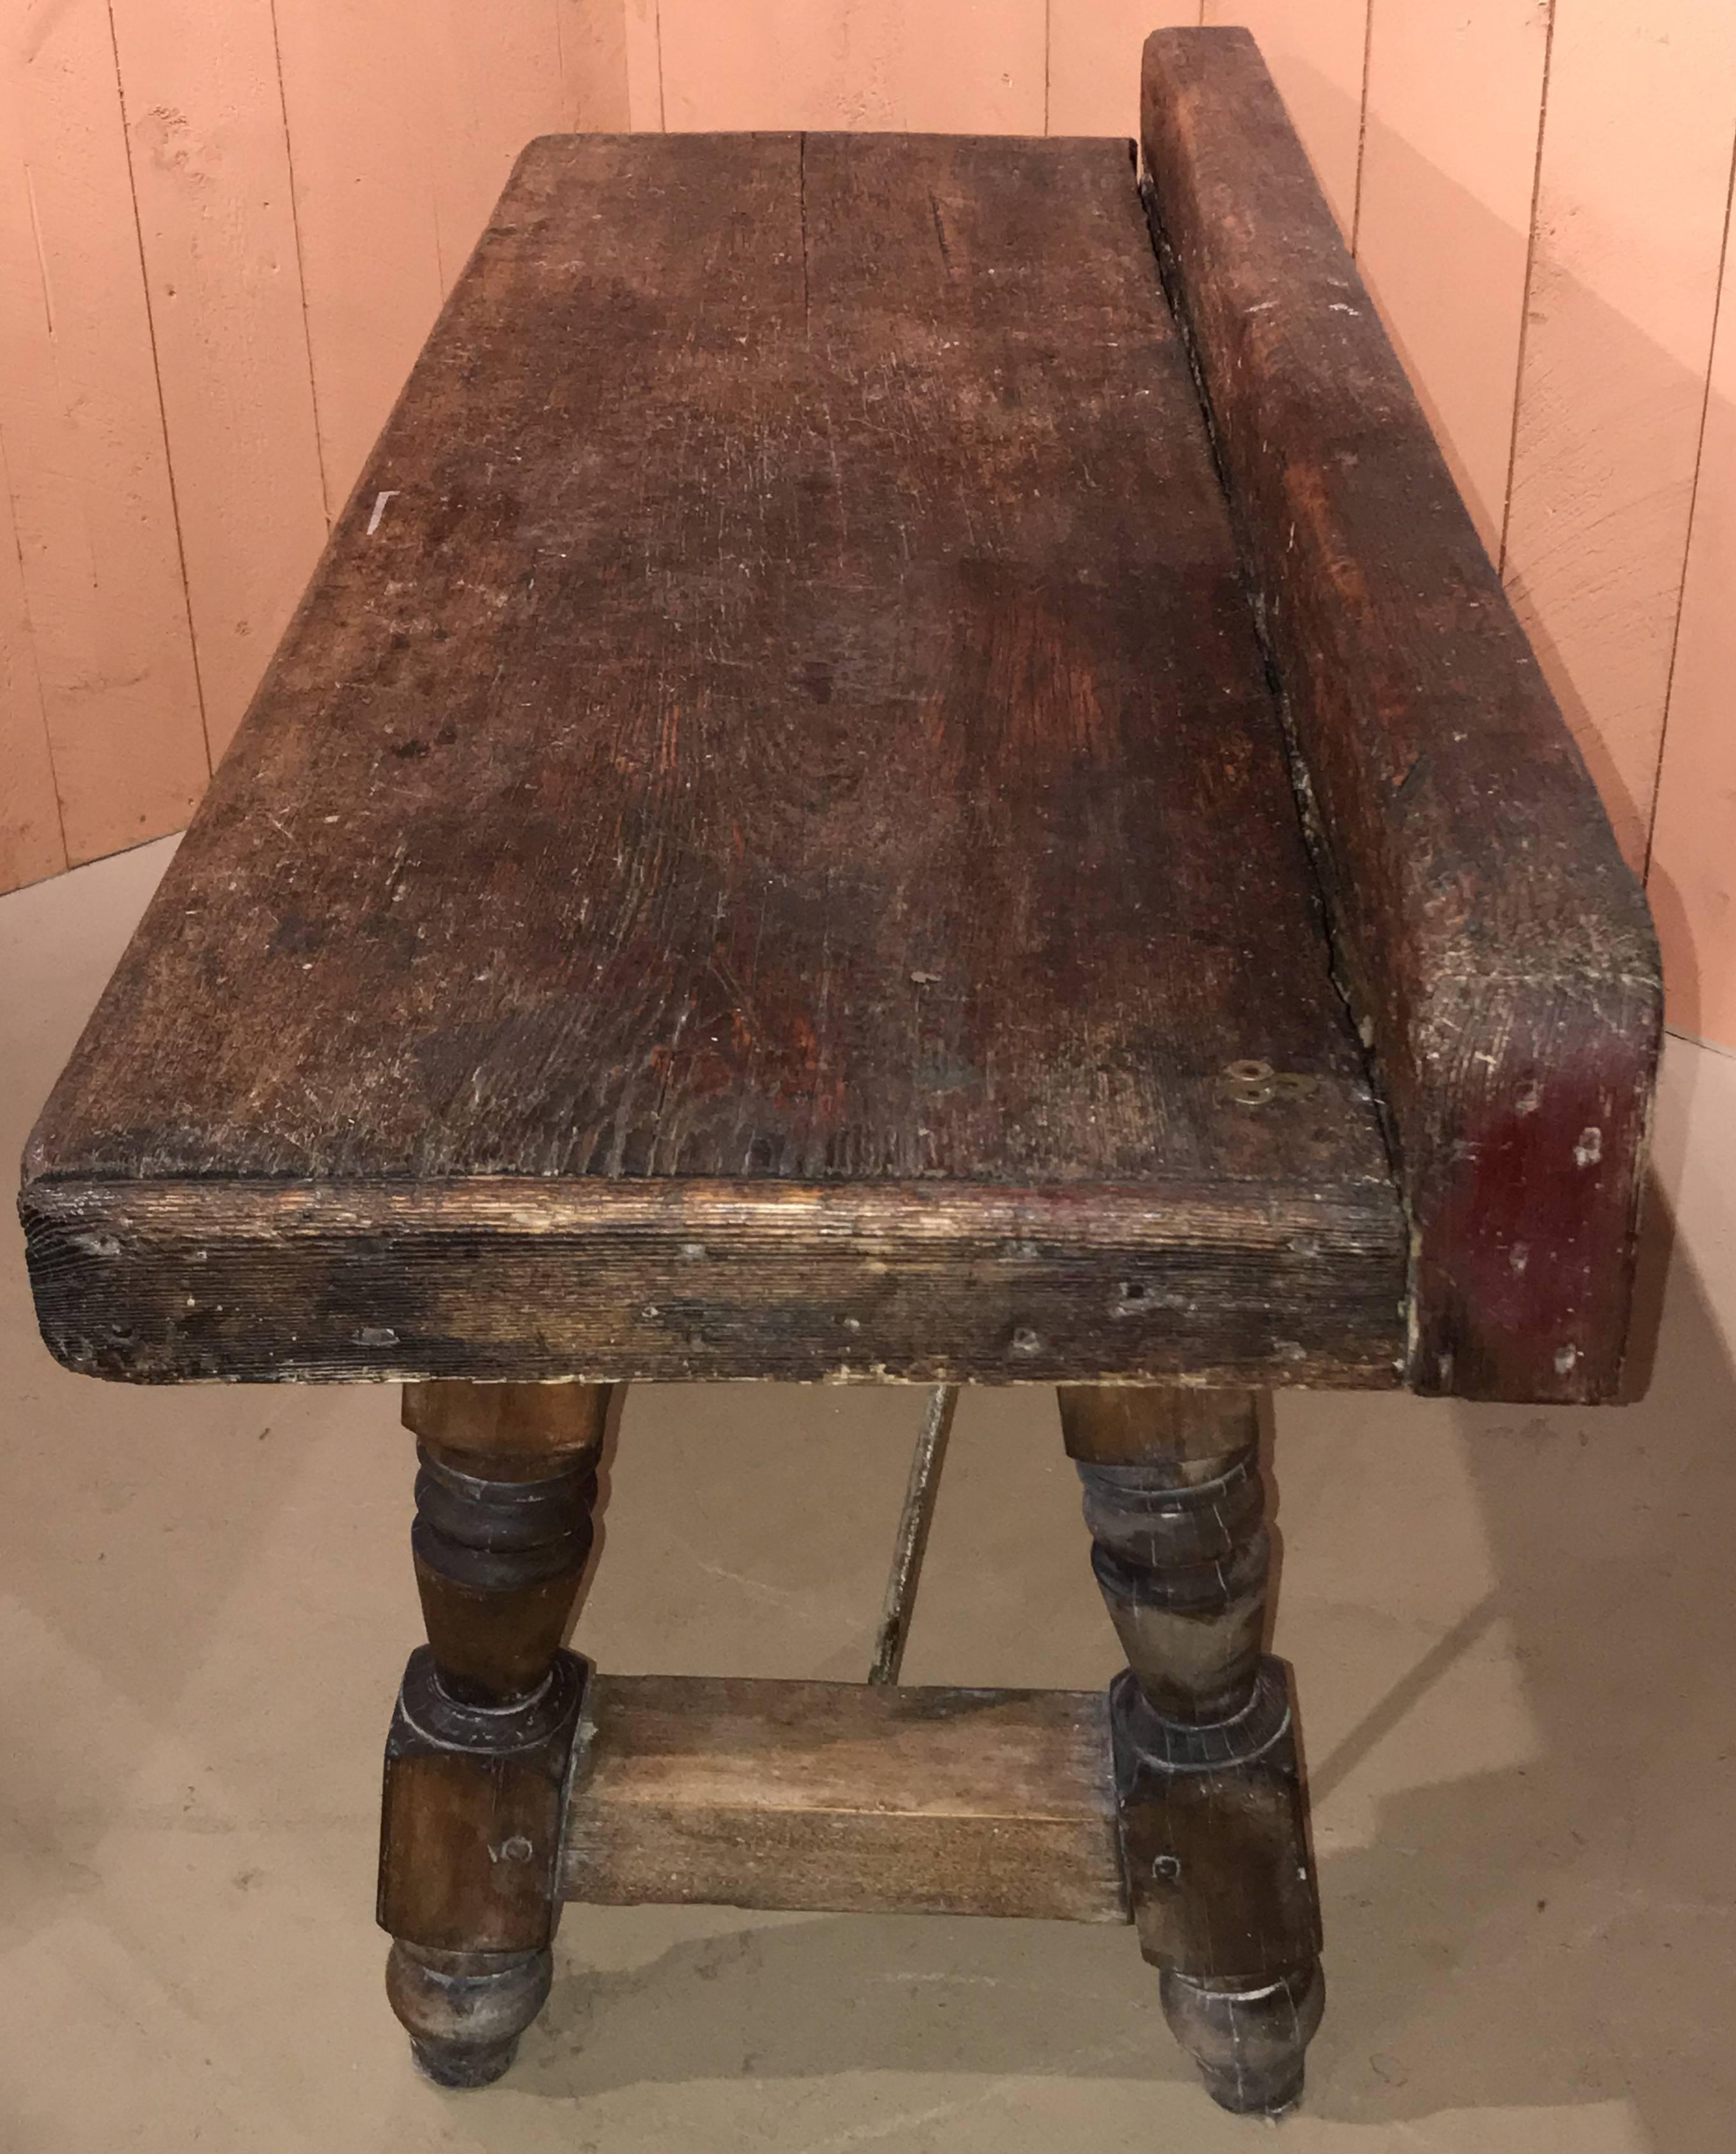 A fabulous counter, workbench, or server featuring a rectangle wooden slab with crest rail, splayed turned legs, and iron stretchers, probably in walnut, Continental, dating to the 19th century with great worn patina. The piece is in very good